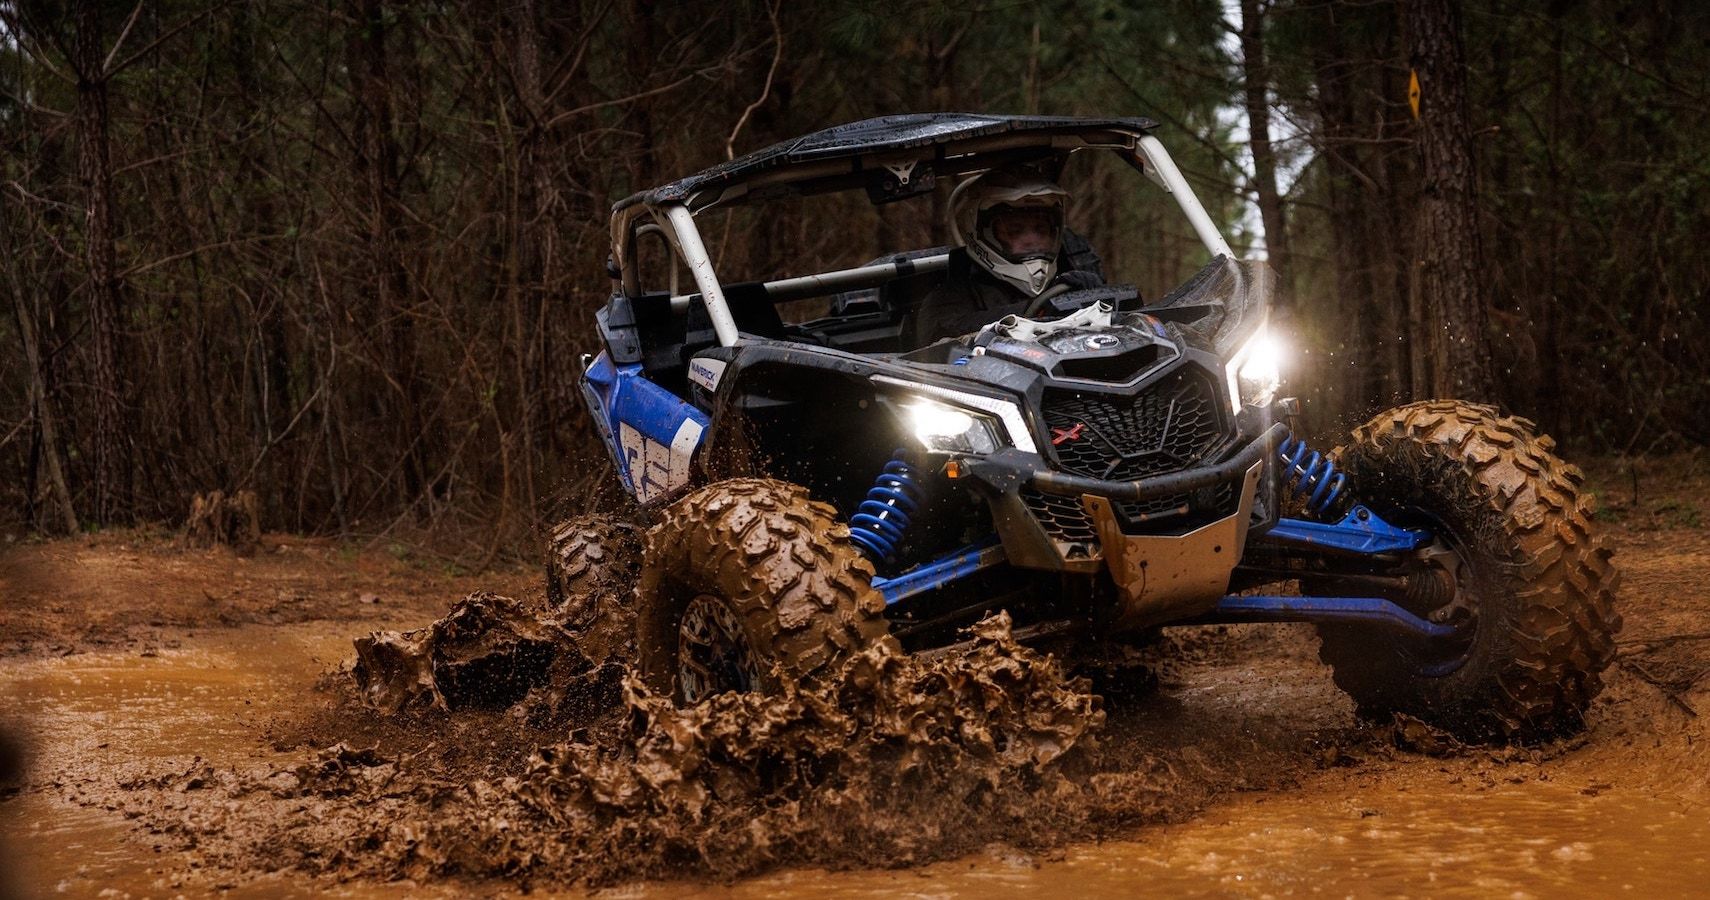 Can-Am Maverick X3 sliding in mud hd off-roading wallpaper view